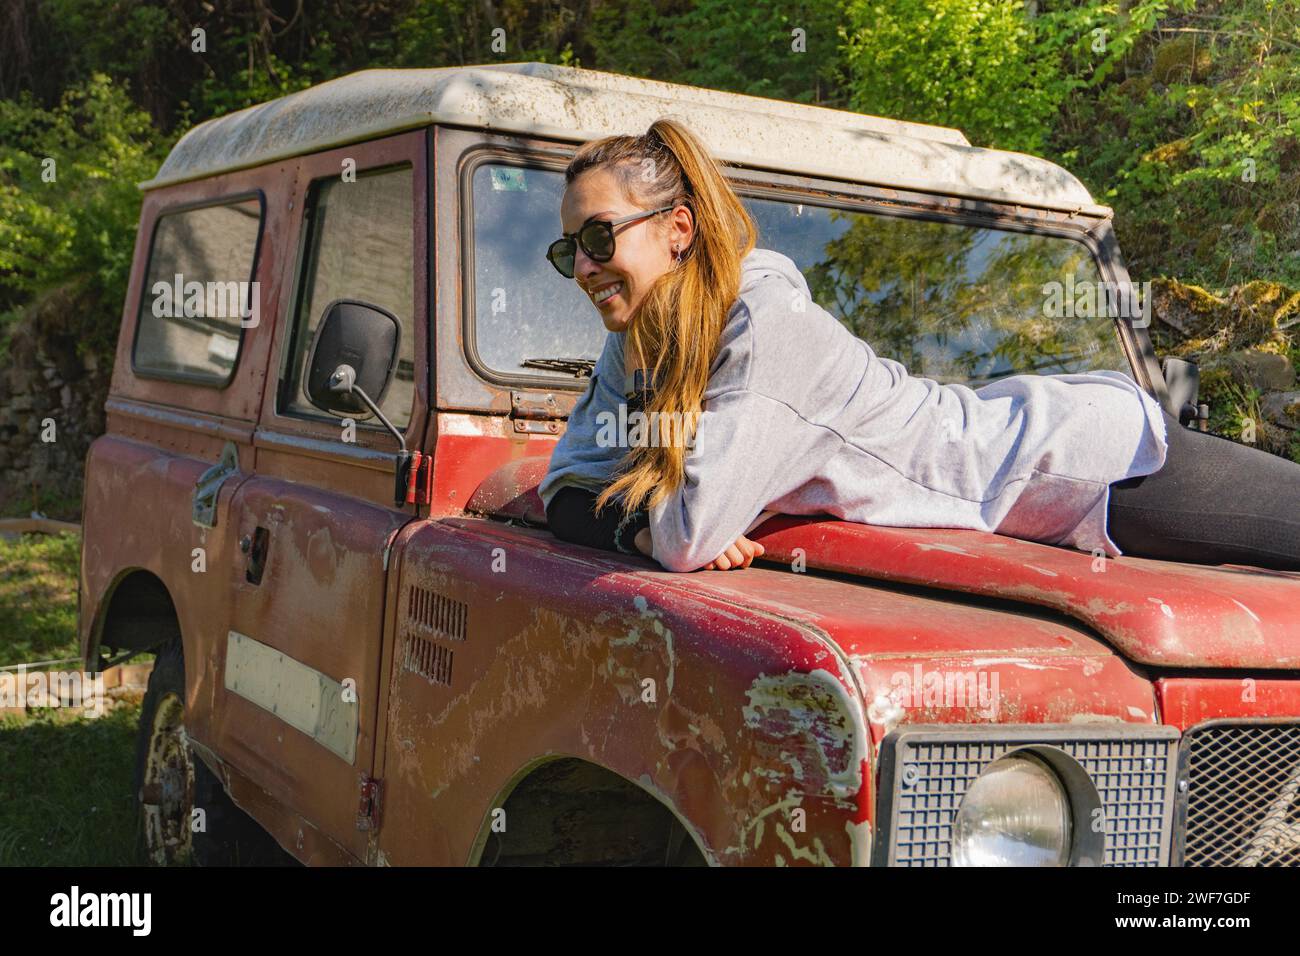 Woman lying on the hood of an old red off-road vehicle parked in Stock Photo